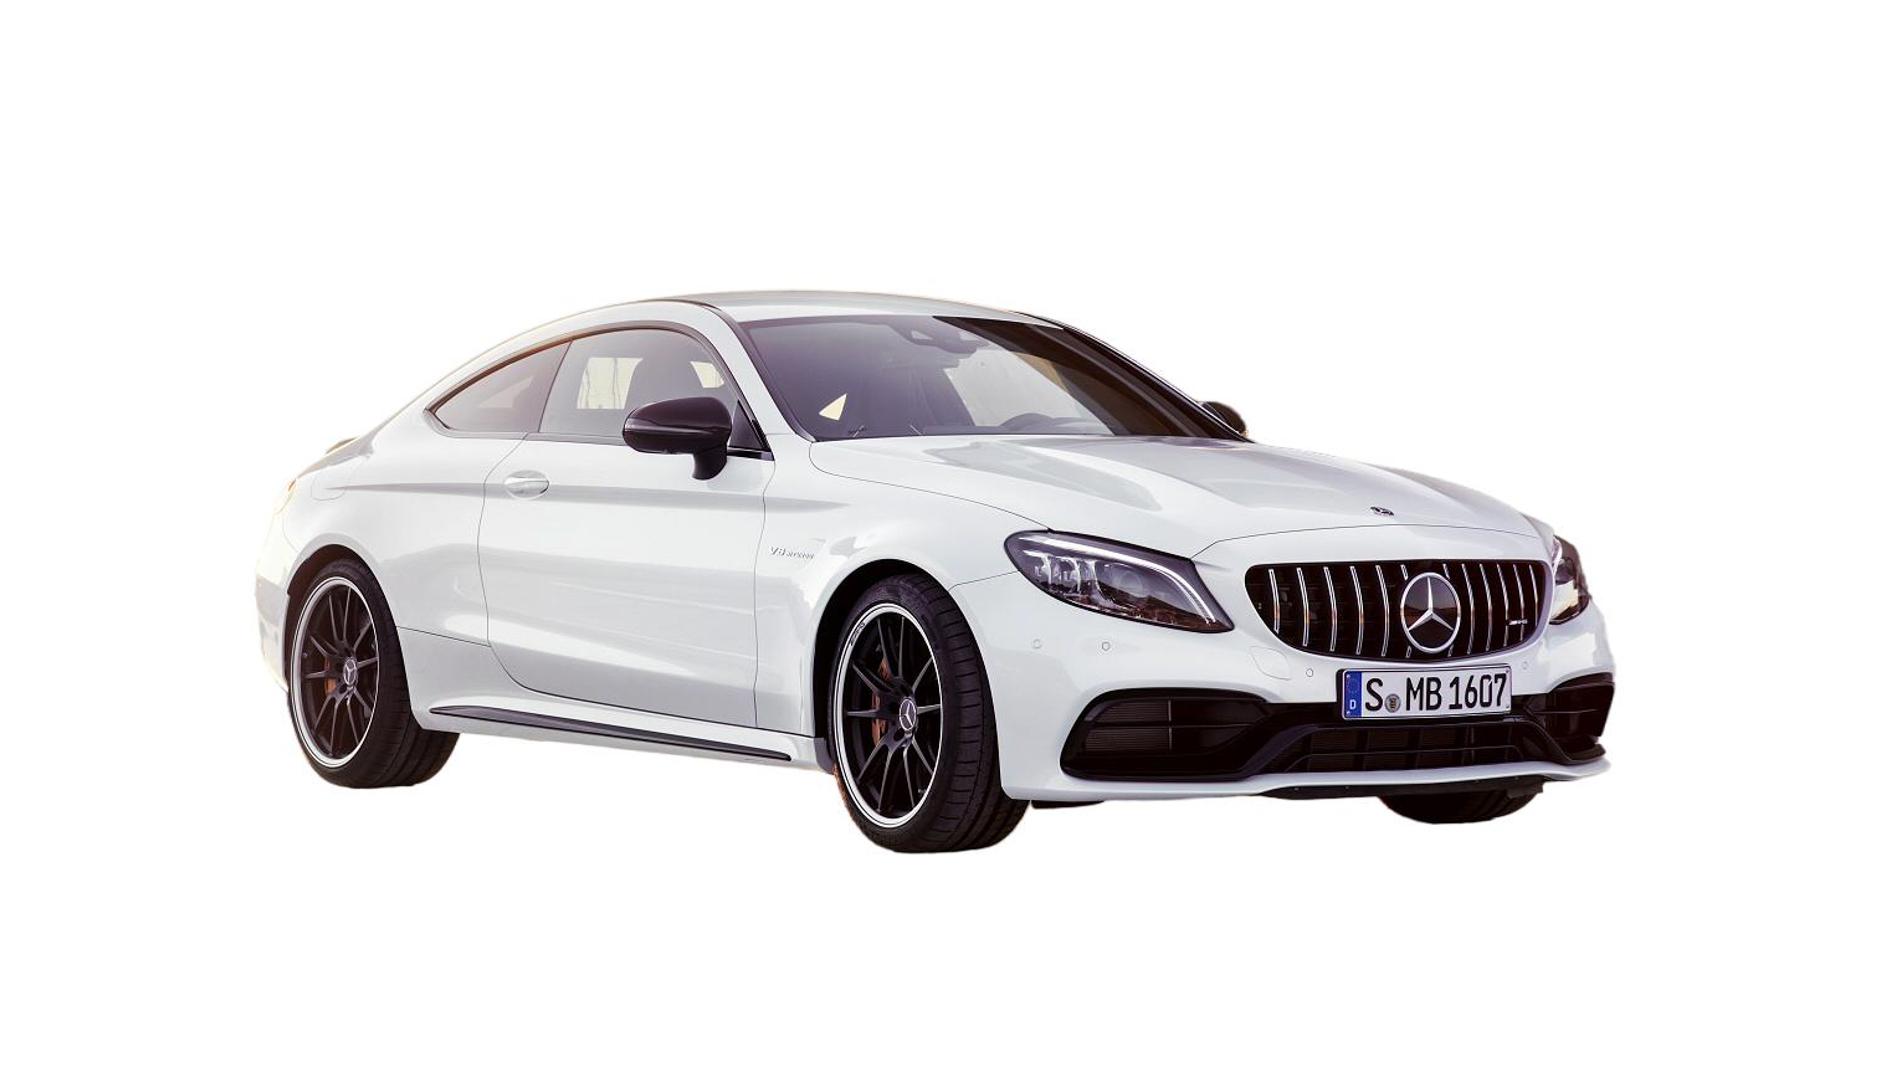 C Class Amg Coupe Special Editions